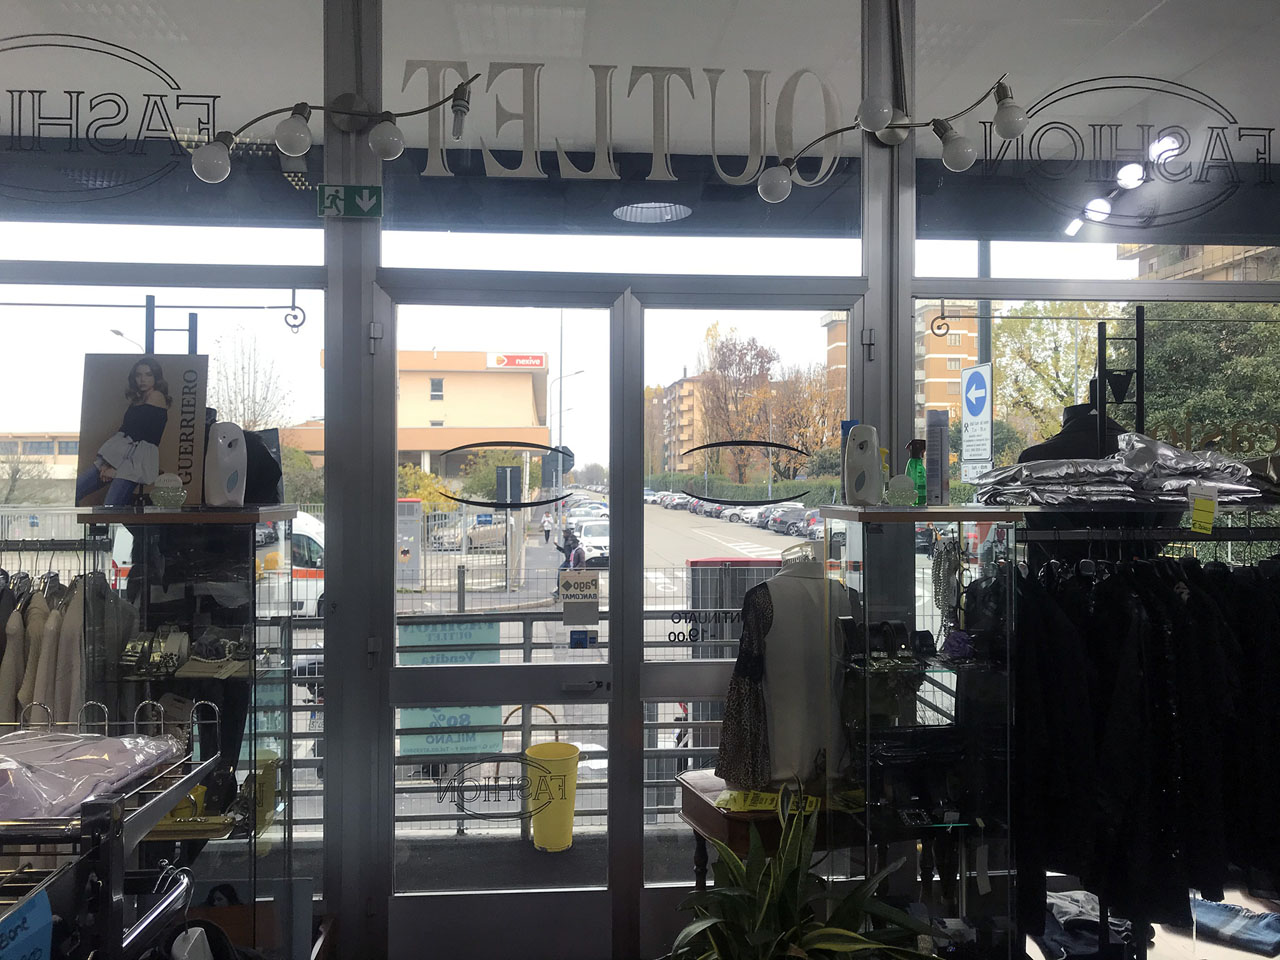 Store / Office for rent in Milan - 55 sq m (592 sq ft) inside